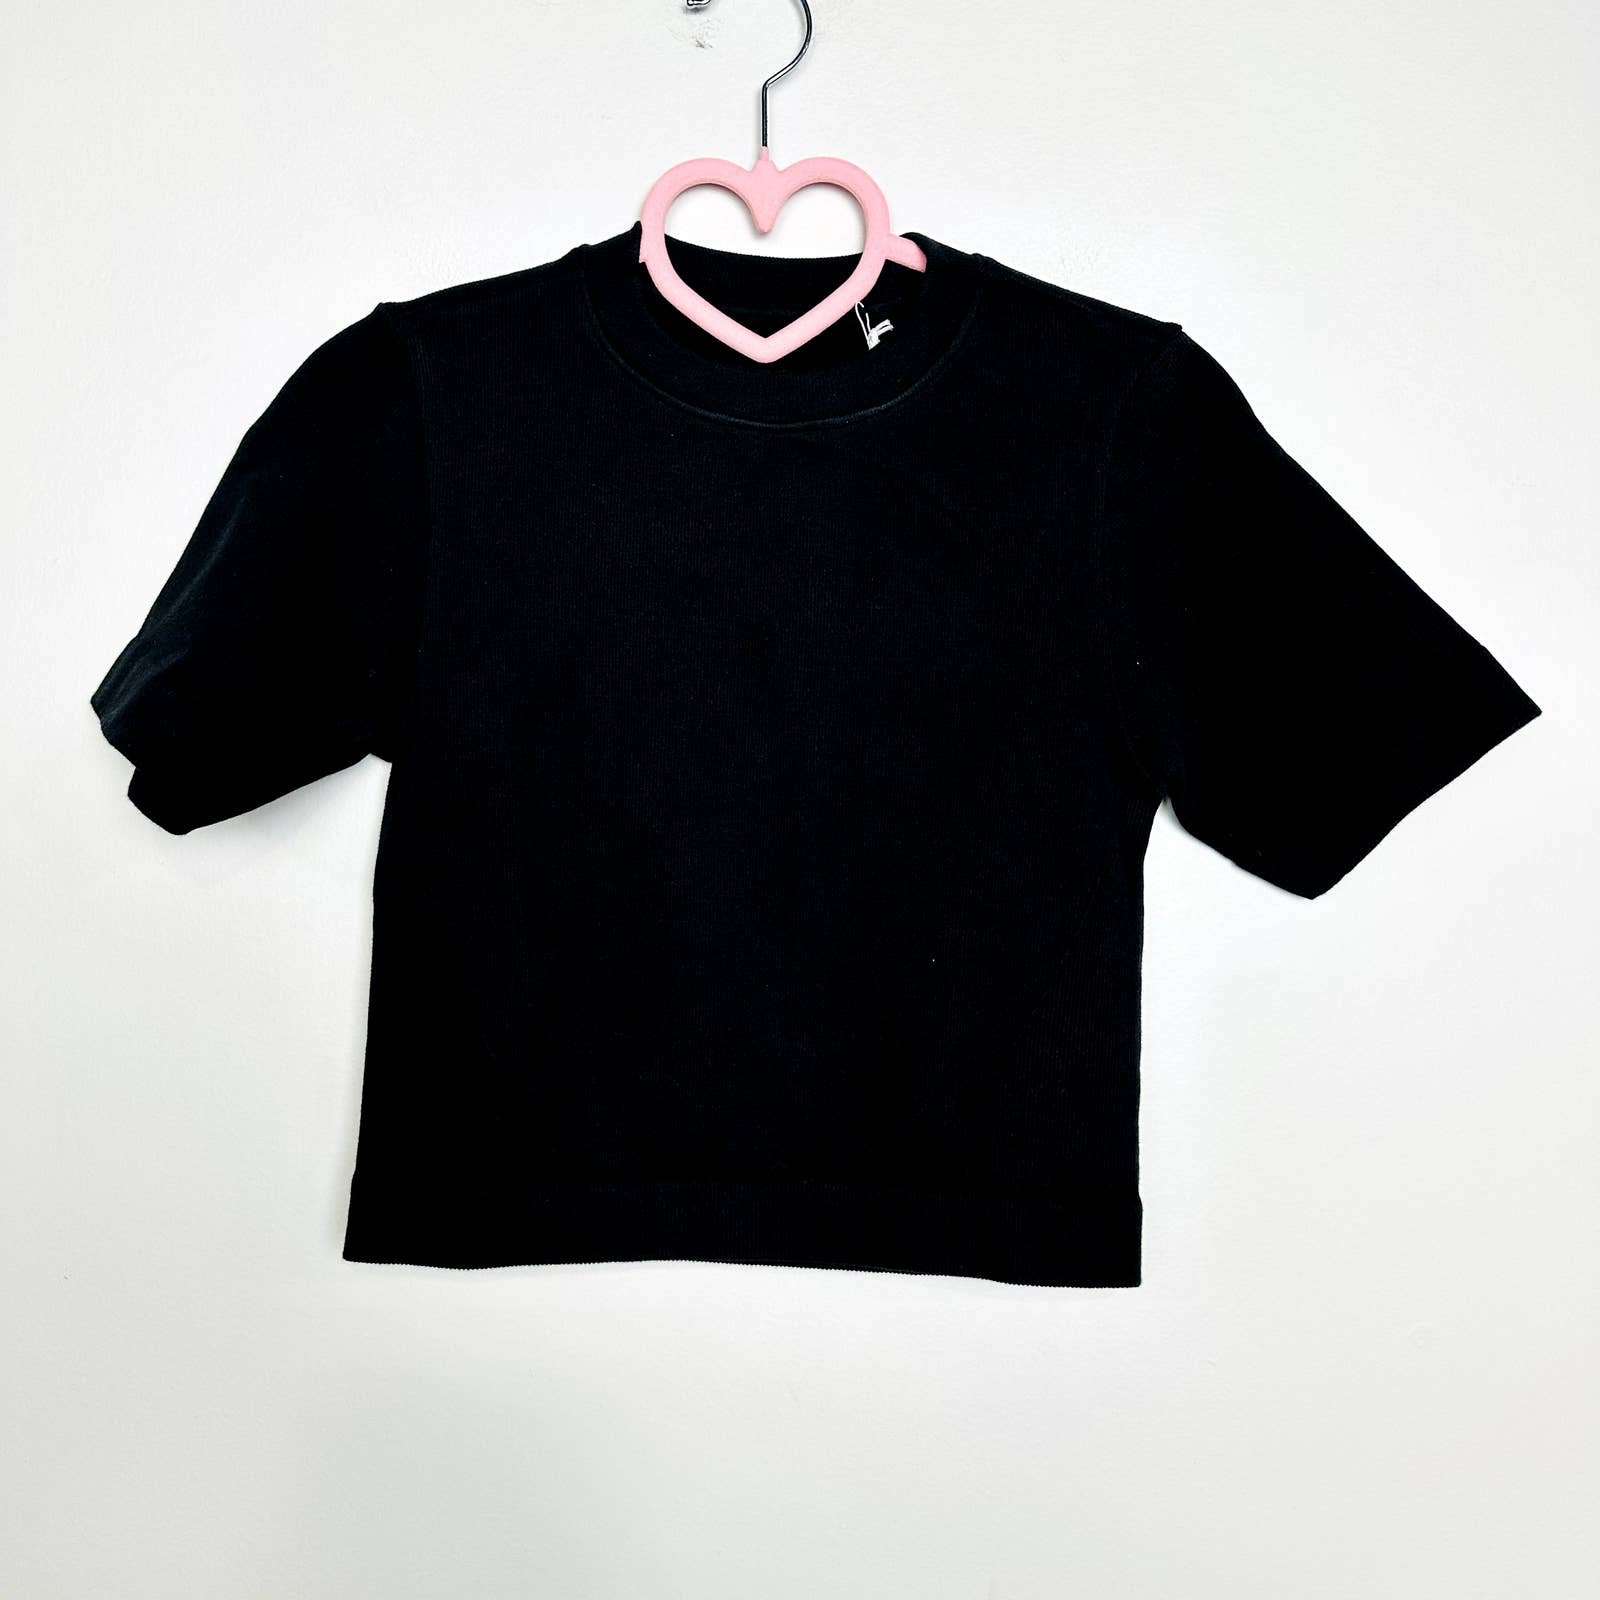 Everlane NWT The Seamless Tee Activewear Short Sleeve Workout Top Black Sz XS/S